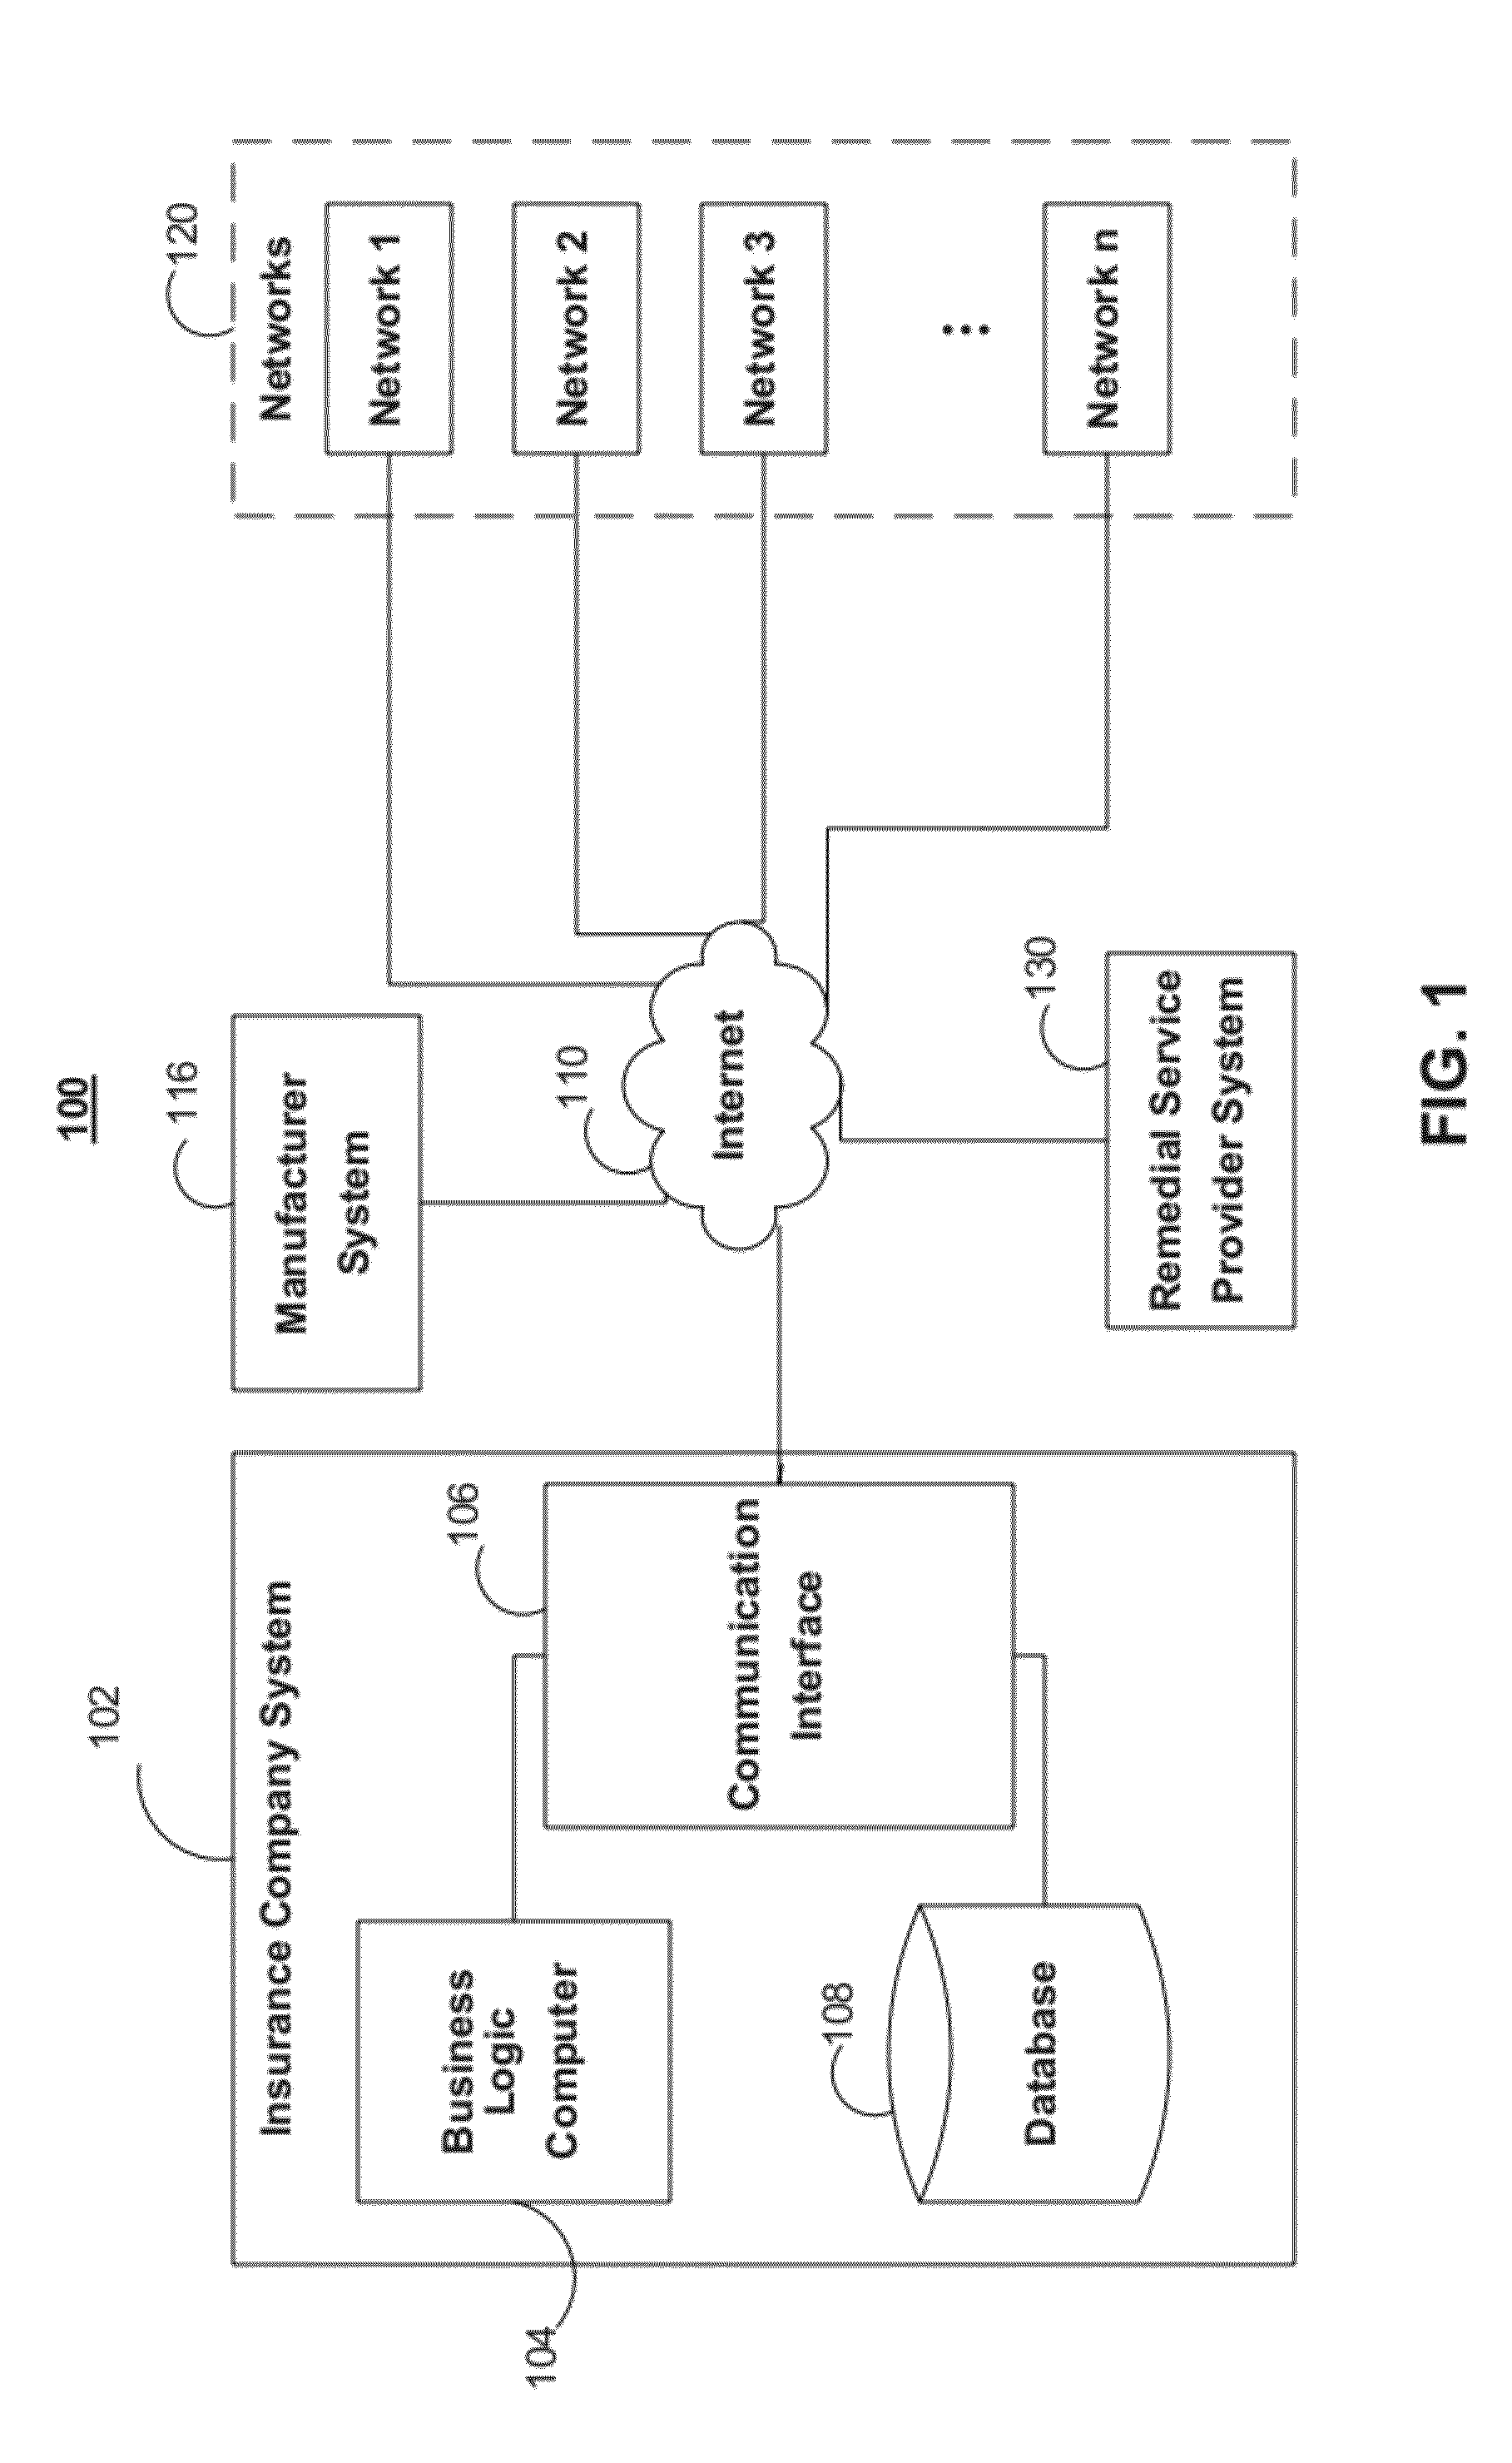 System and method for active insurance underwriting using intelligent ip-addressable devices